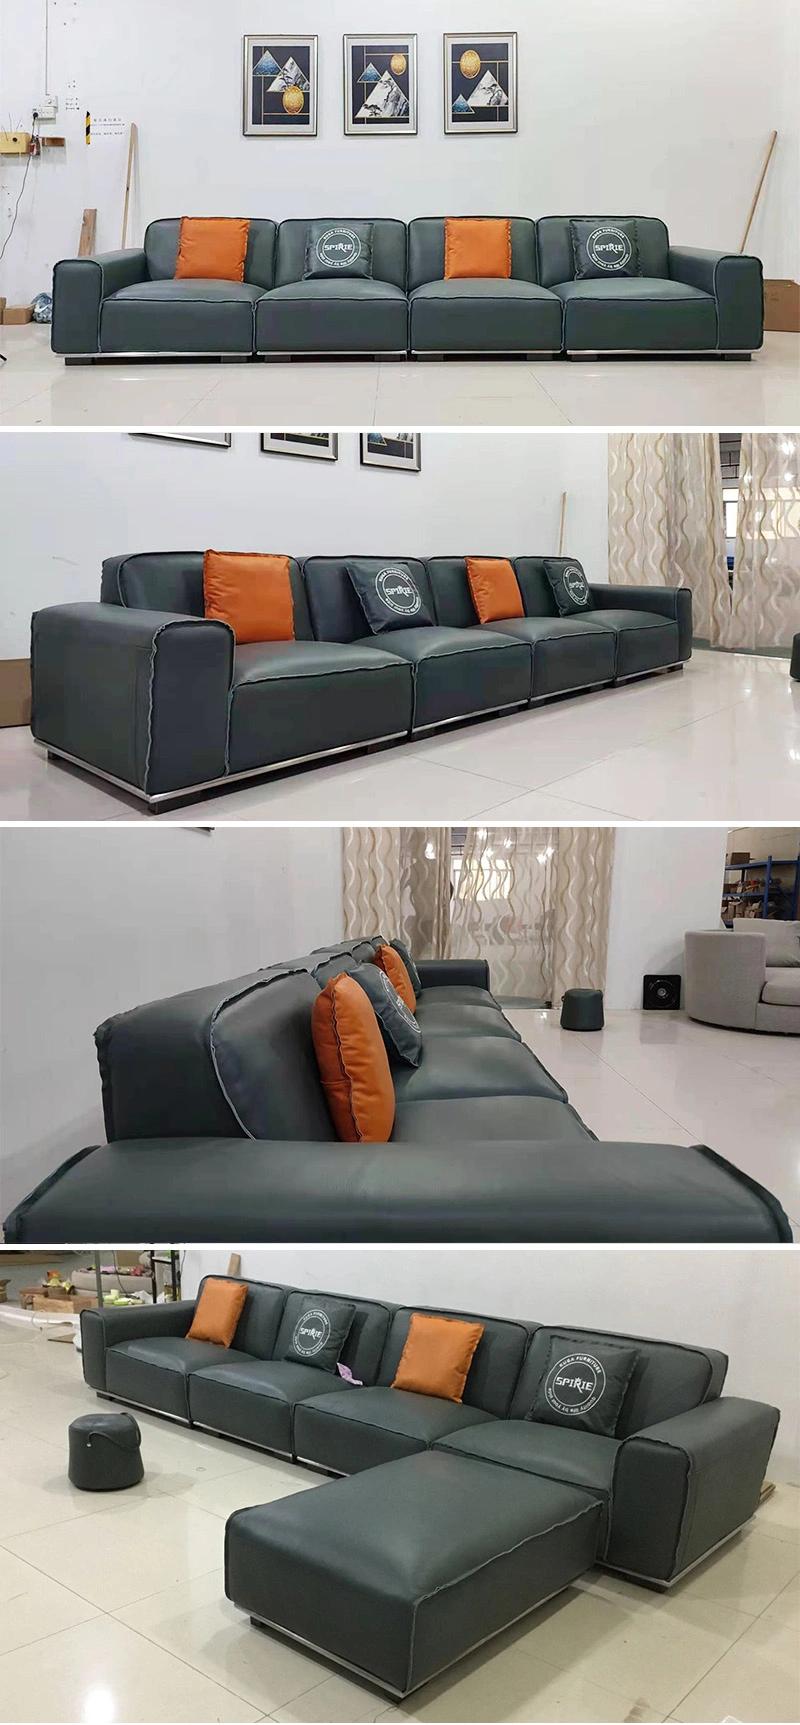 Modern Fabric Sofa Contemporary Leather Couch Leisure Living Room Furniture for Home 2827